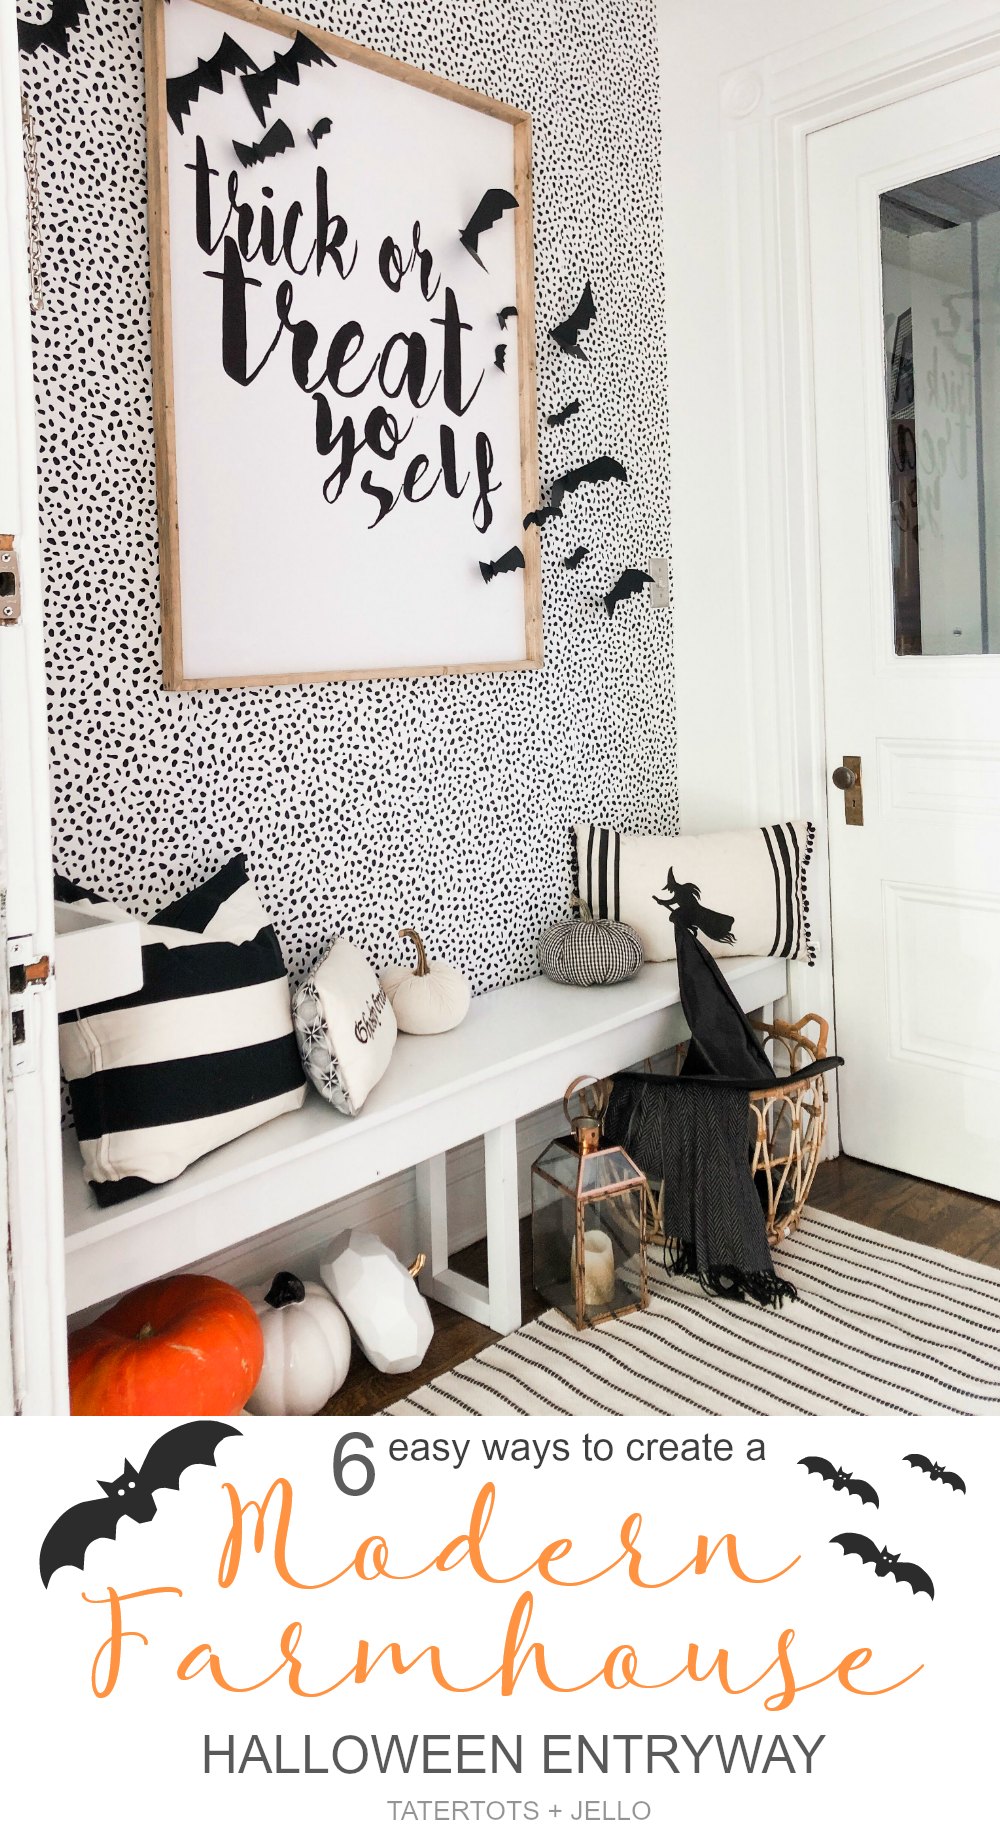 6 Ways to Create a Modern Farmhouse Halloween Entryway. Just because a space is small, doesn't mean it can't be BIG on style. Use removable wallpaper, spooky accents and an over-sized print to create a delightful Halloween space!